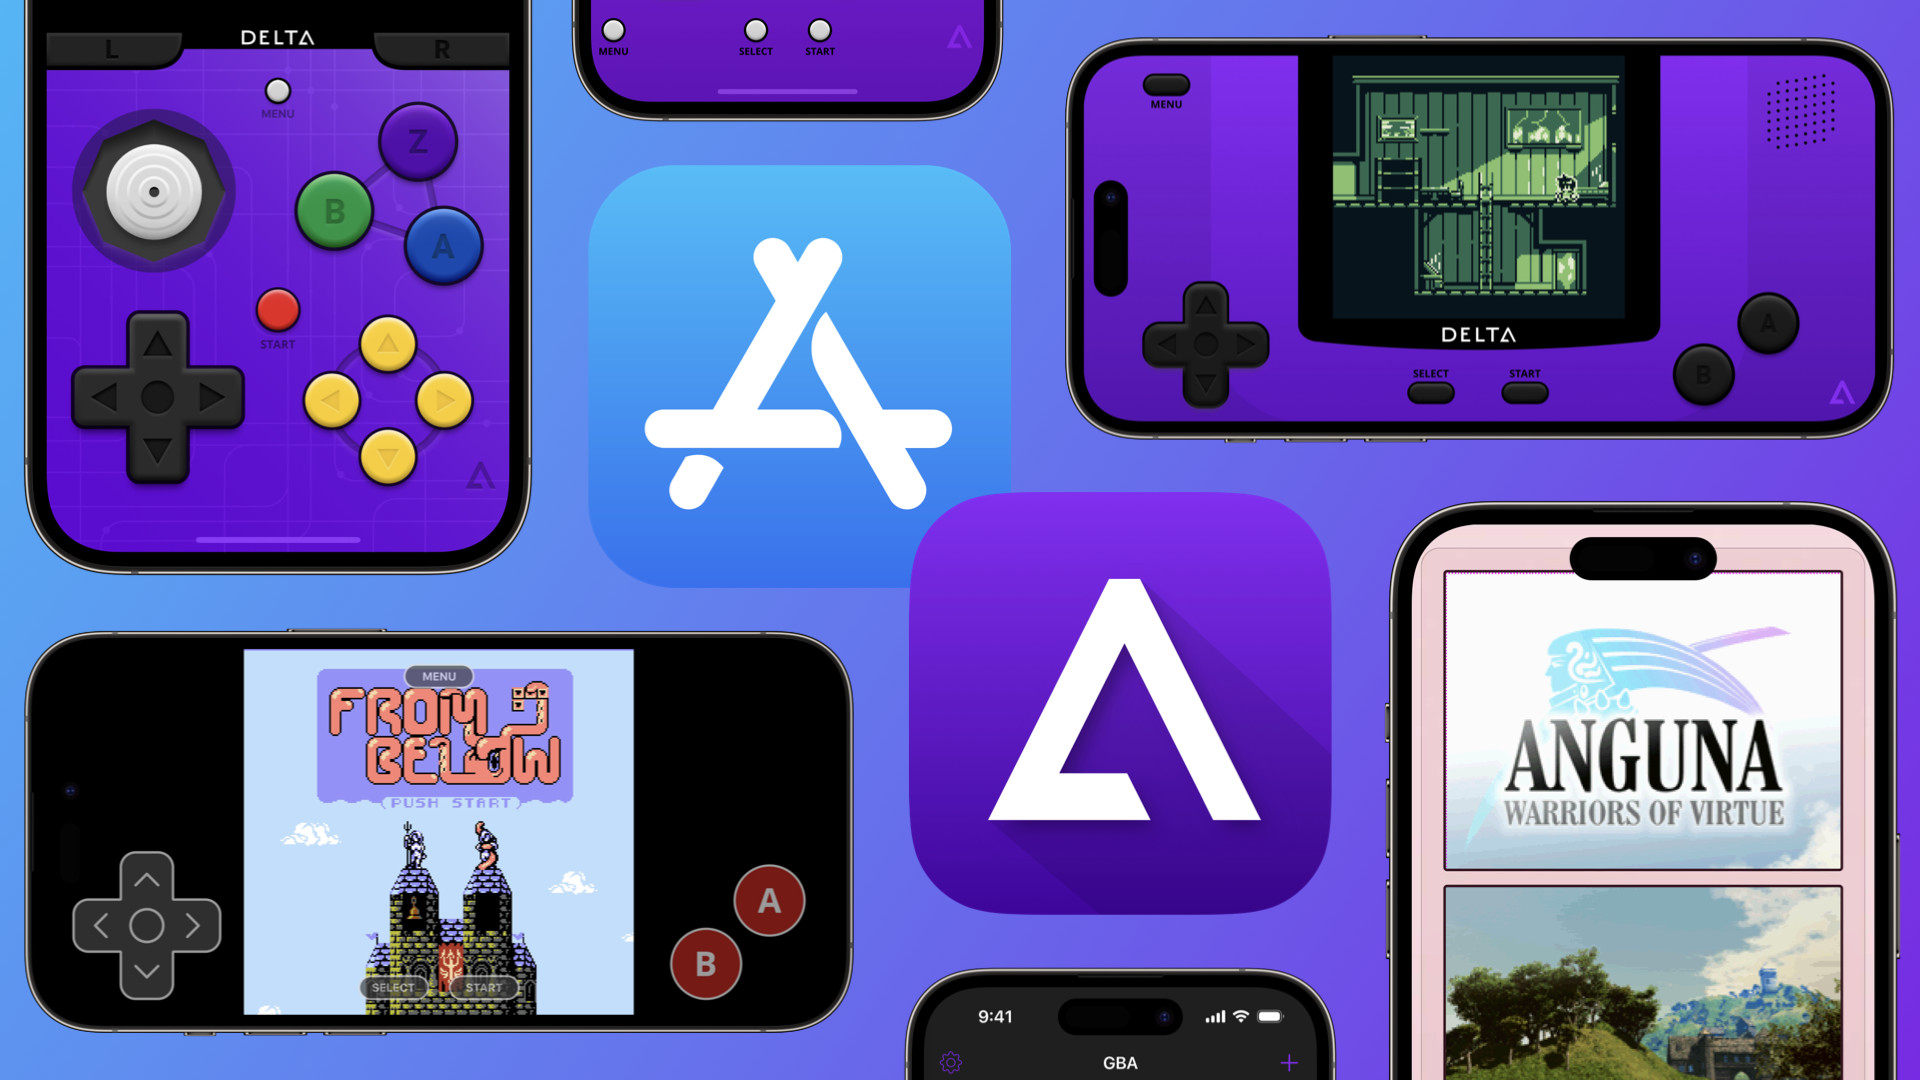 airplay turns the delta emulator into a full-on retro console